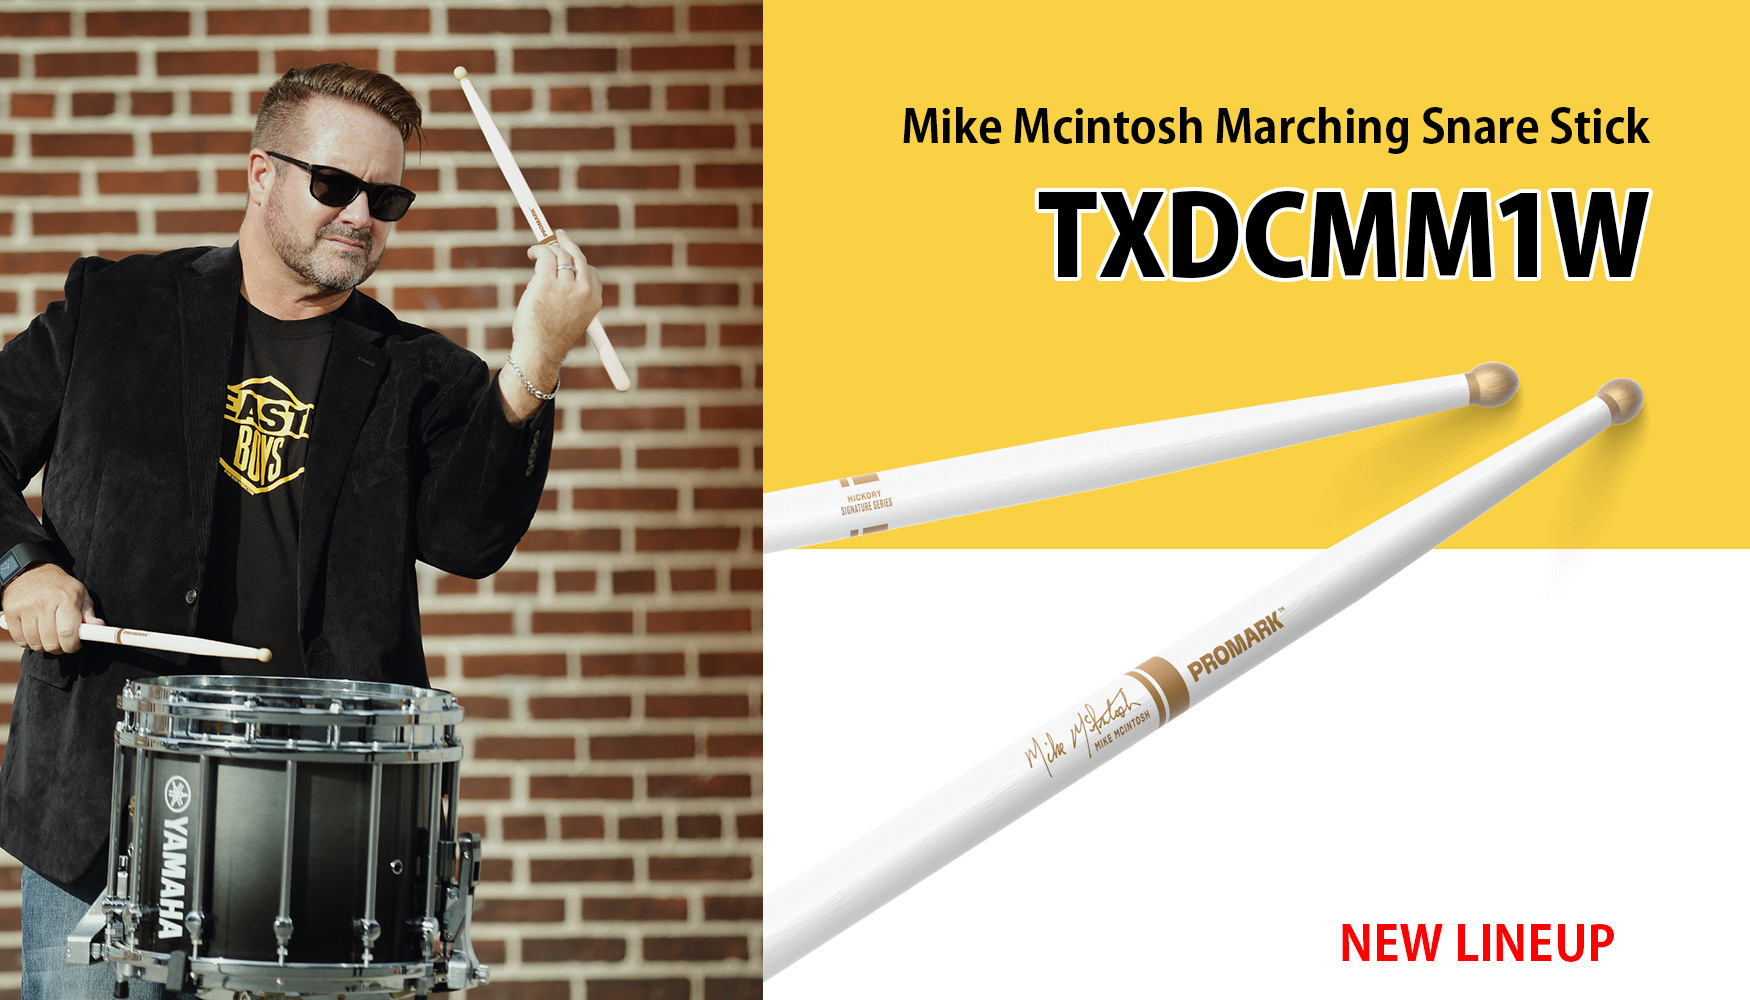 Mike Mcintosh Marching Snare Stick